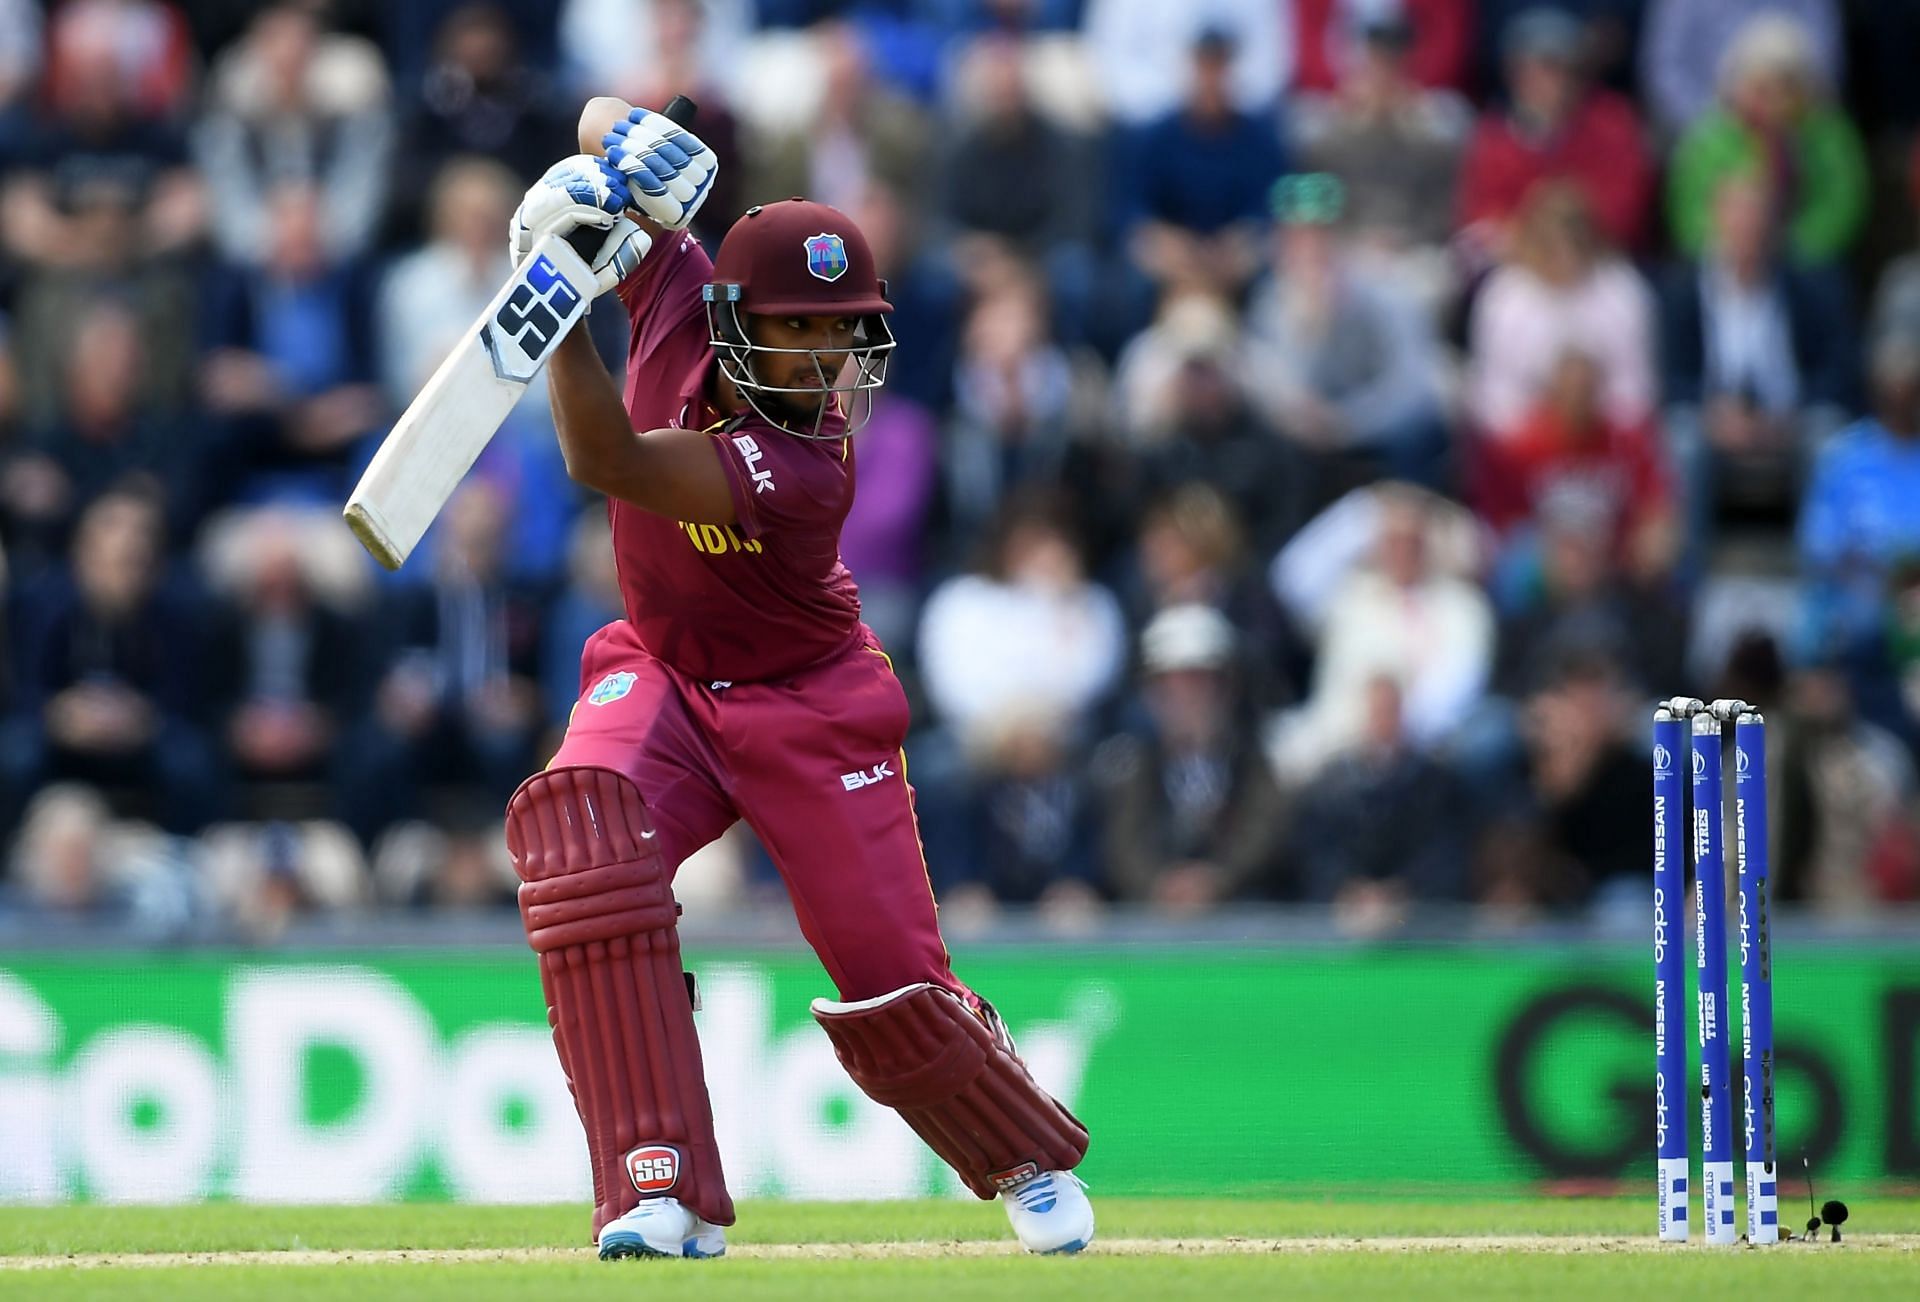 Nicholas Pooran is expected to interest a number of franchises at the auction